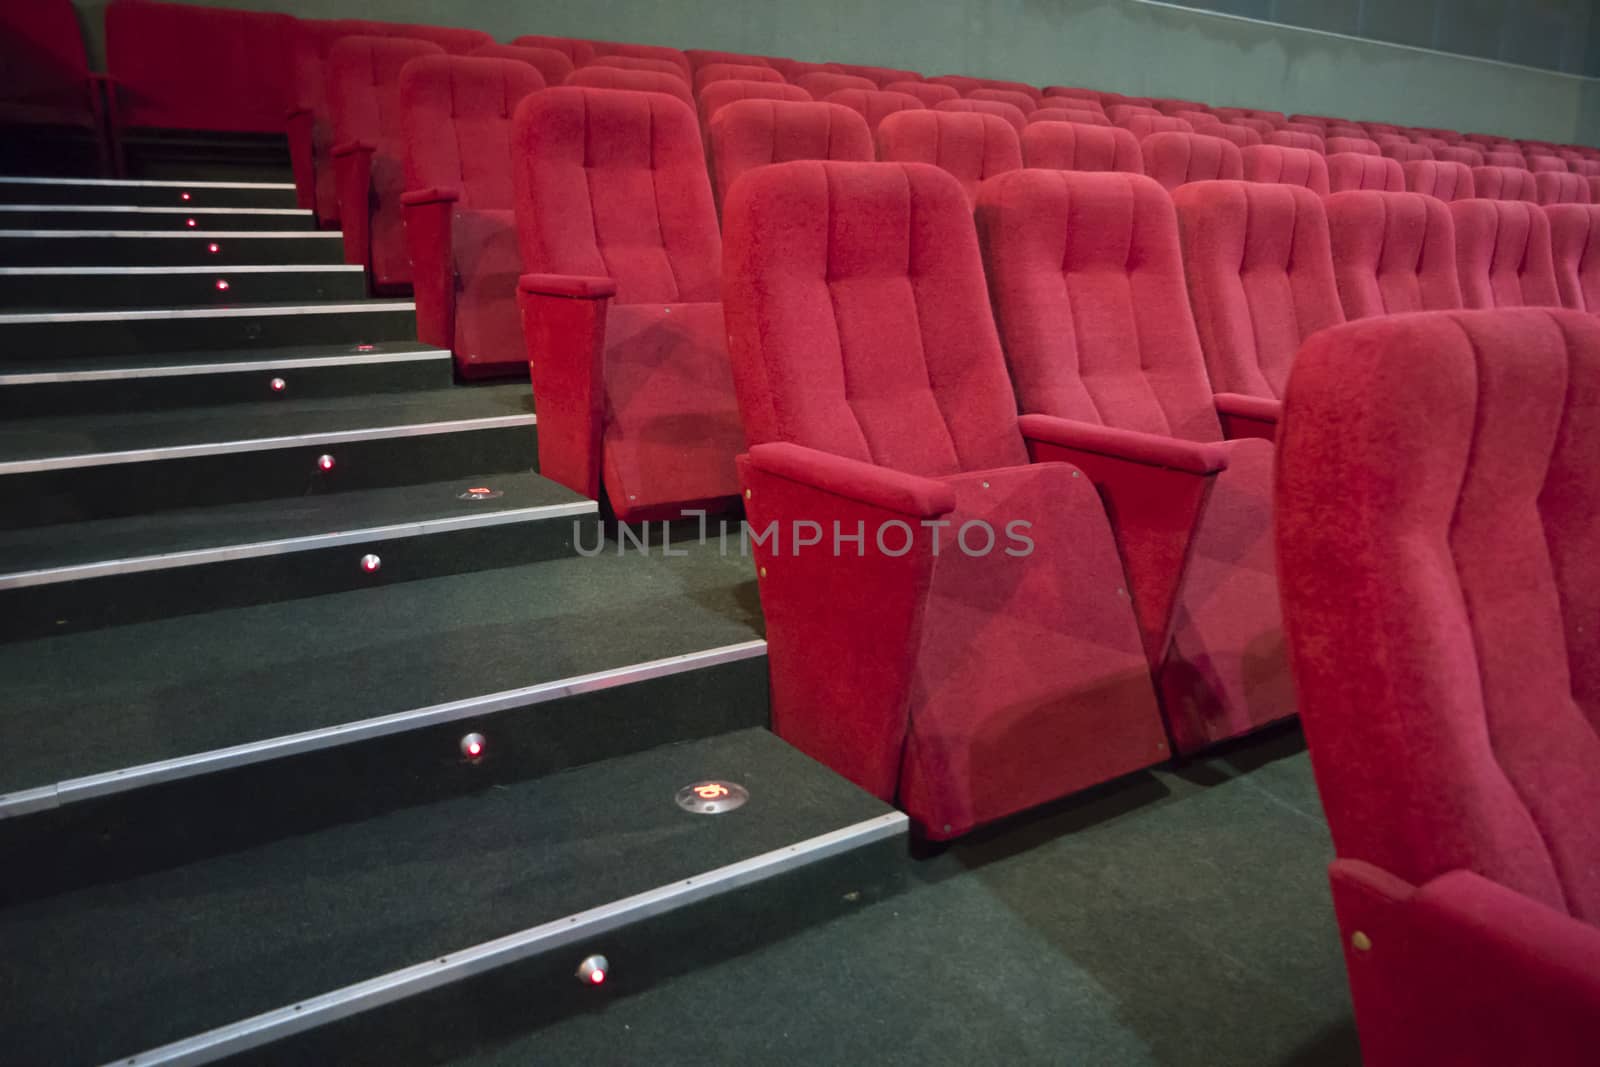 Rows of red seats by vapi